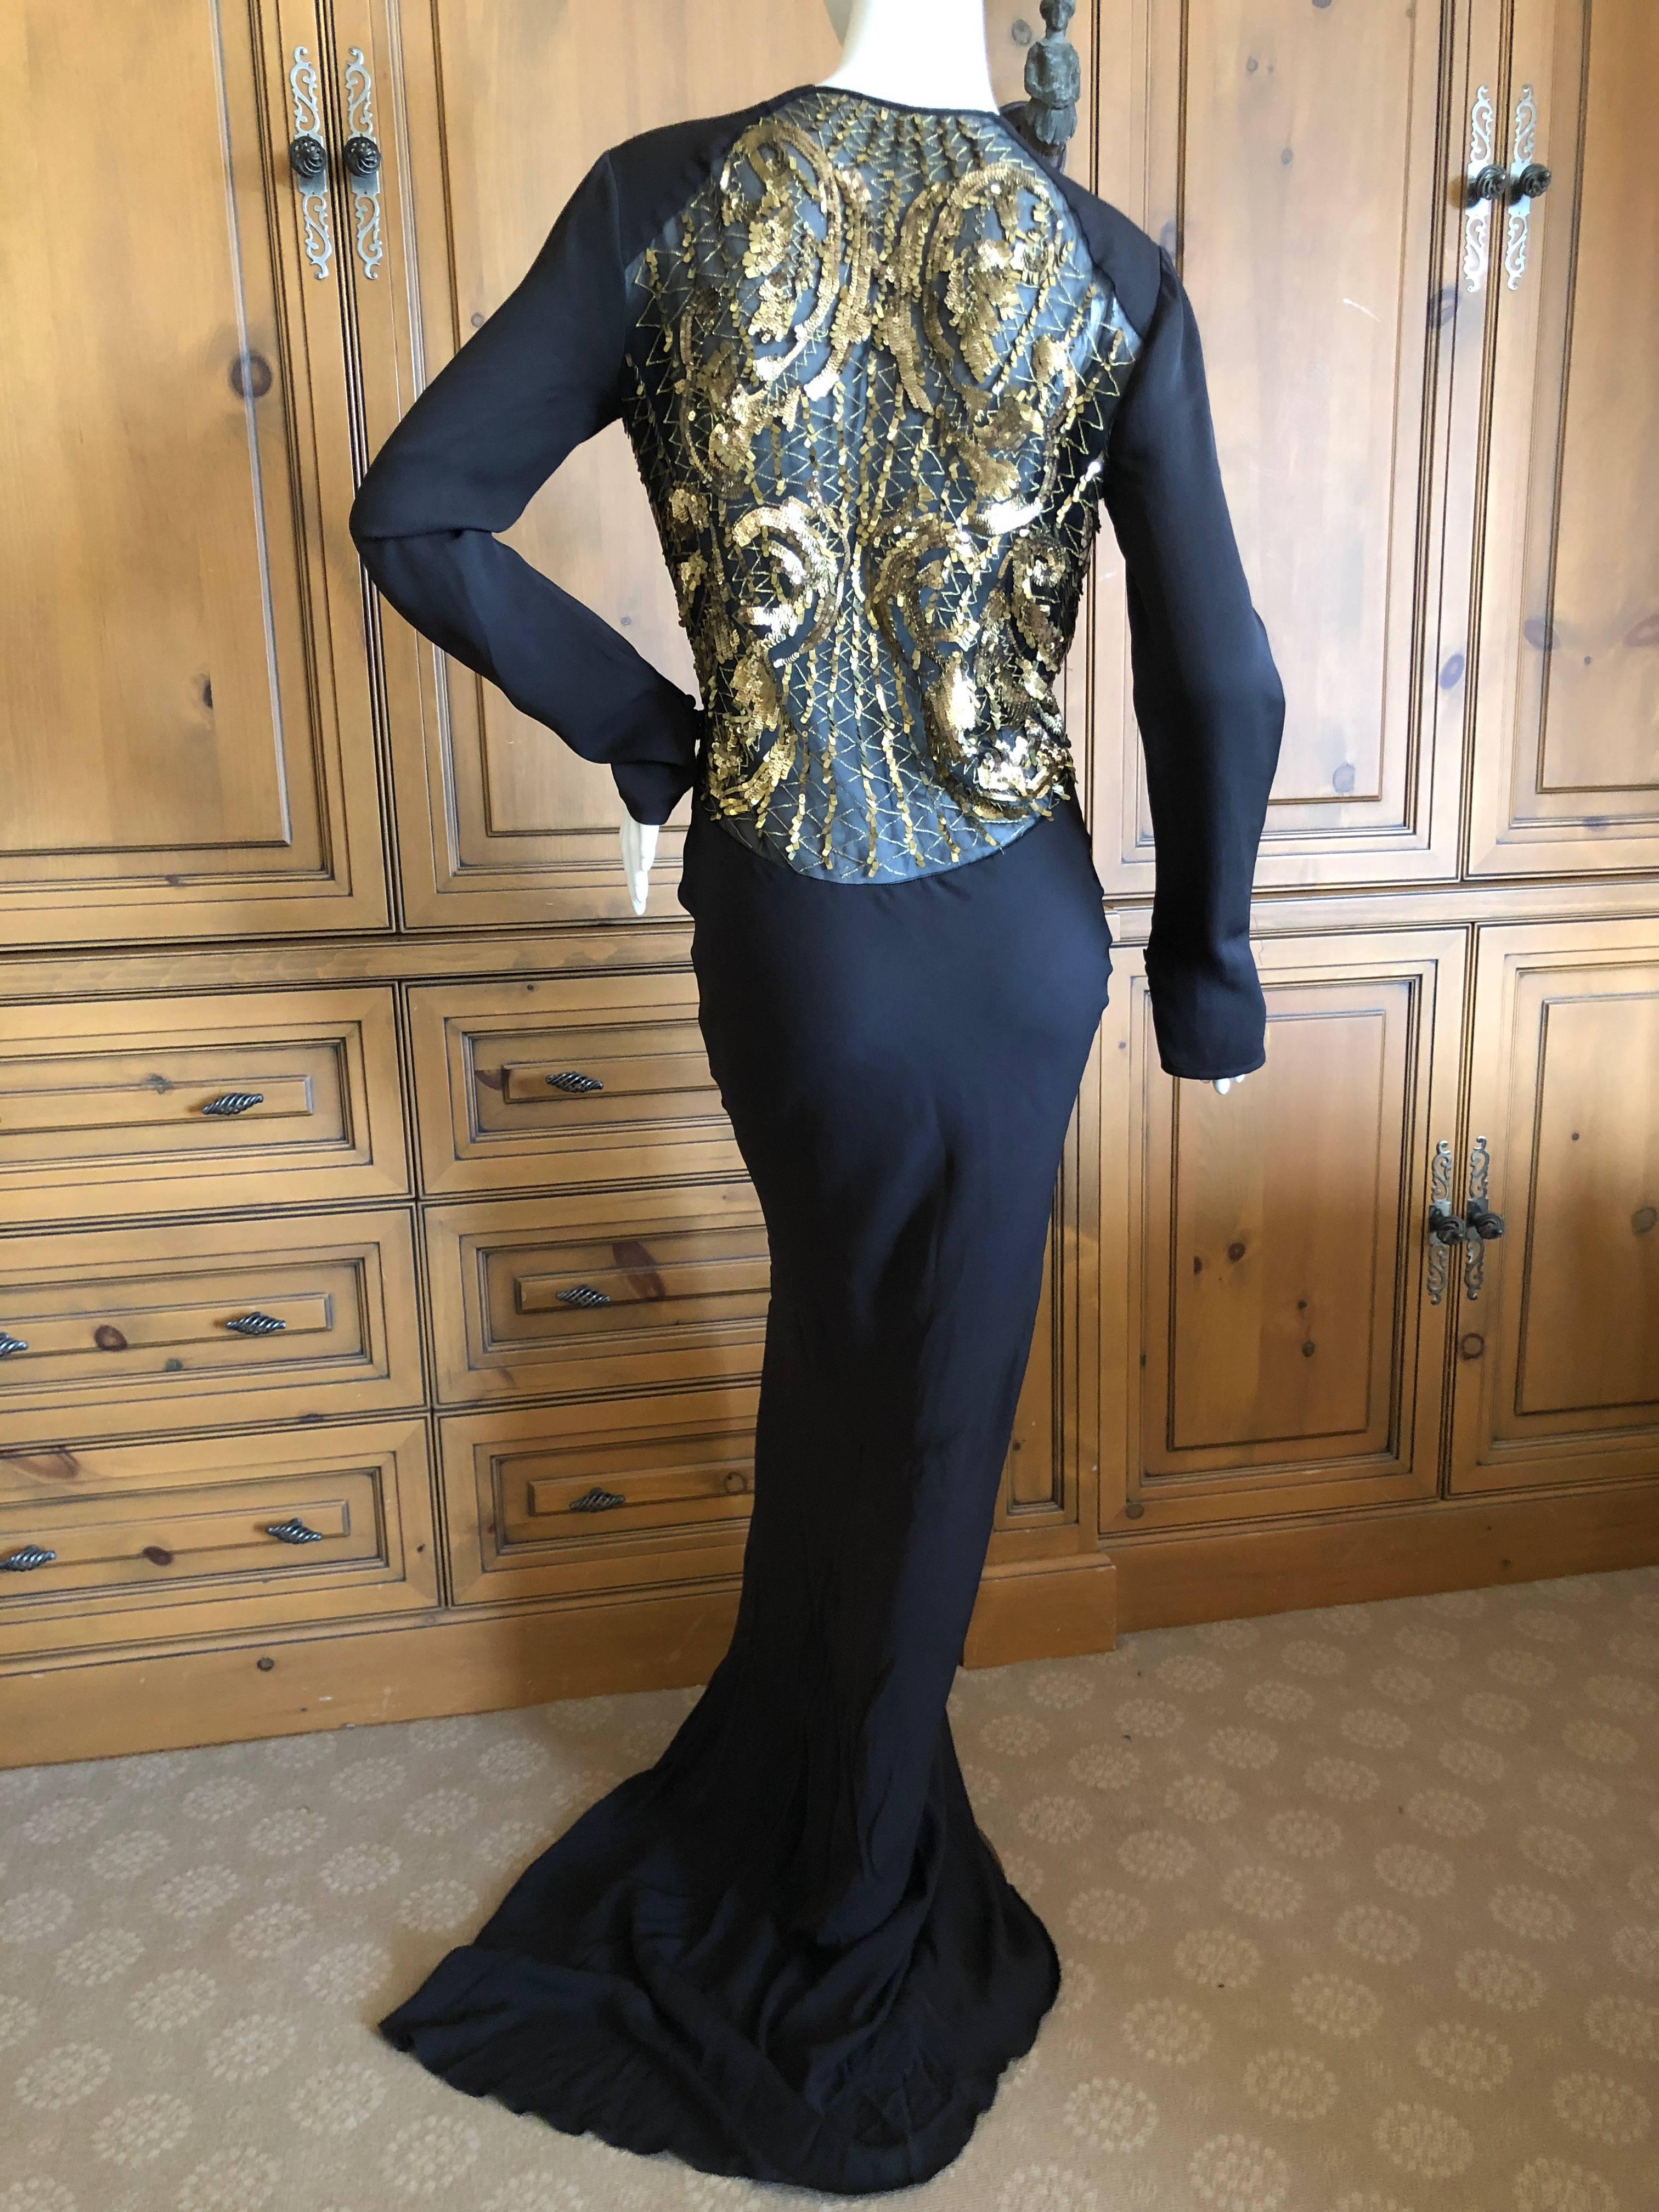 Roberto Cavalli Vintage Black Evening Dress with Gold Sequin Embellishment  .
The back and sides are sheer with exquisite gold sequin baroque pattern embellishments.
Much prettier than the photos.
Size 42
Bust  38